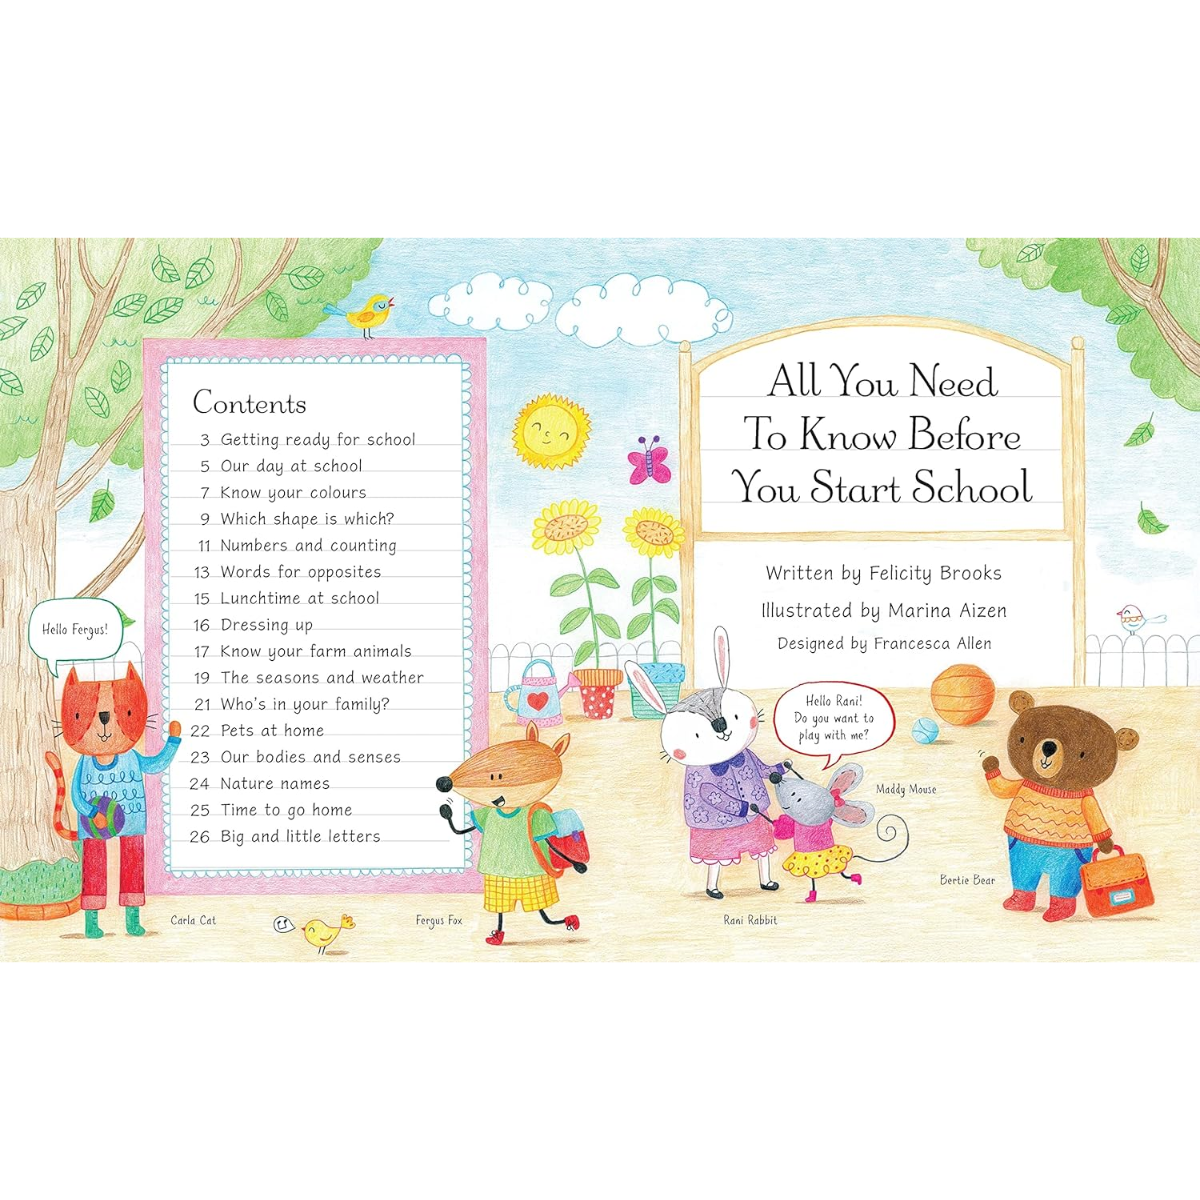 Sách tiếng Anh - Usborne All You Need To Know Before You Start School